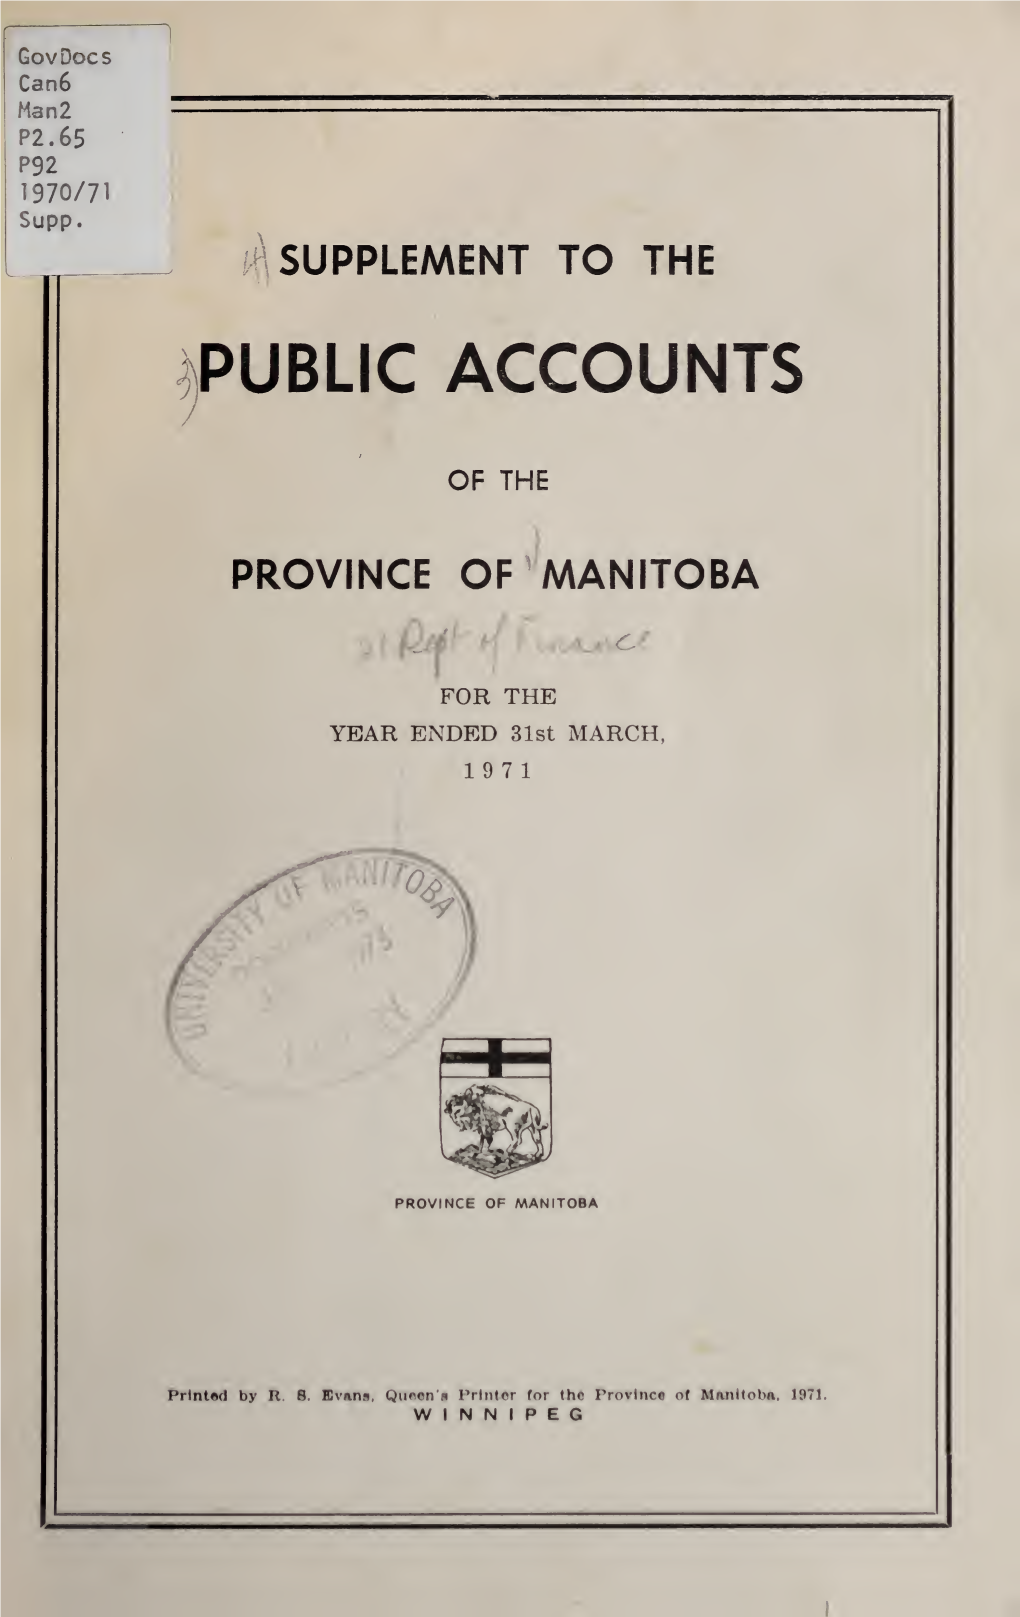 Supplement to the Public Accounts of the Province of Manitoba